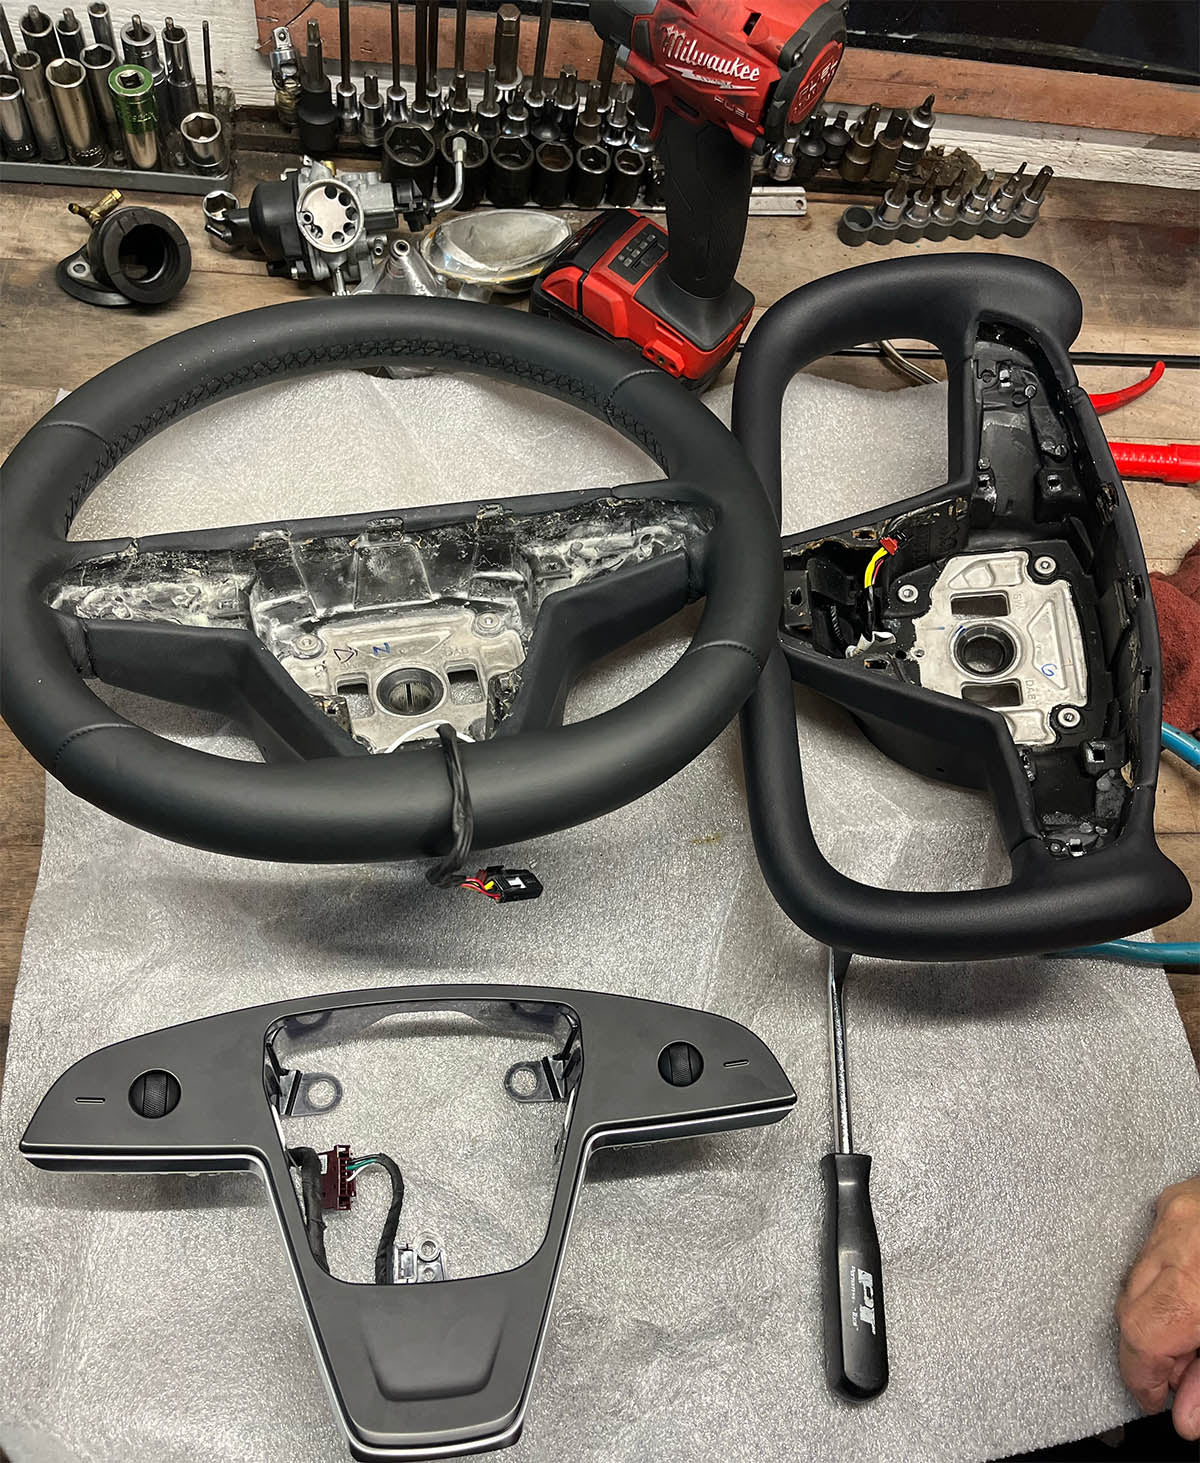 Does changing my Steering Wheel affect the warranty with Tesla